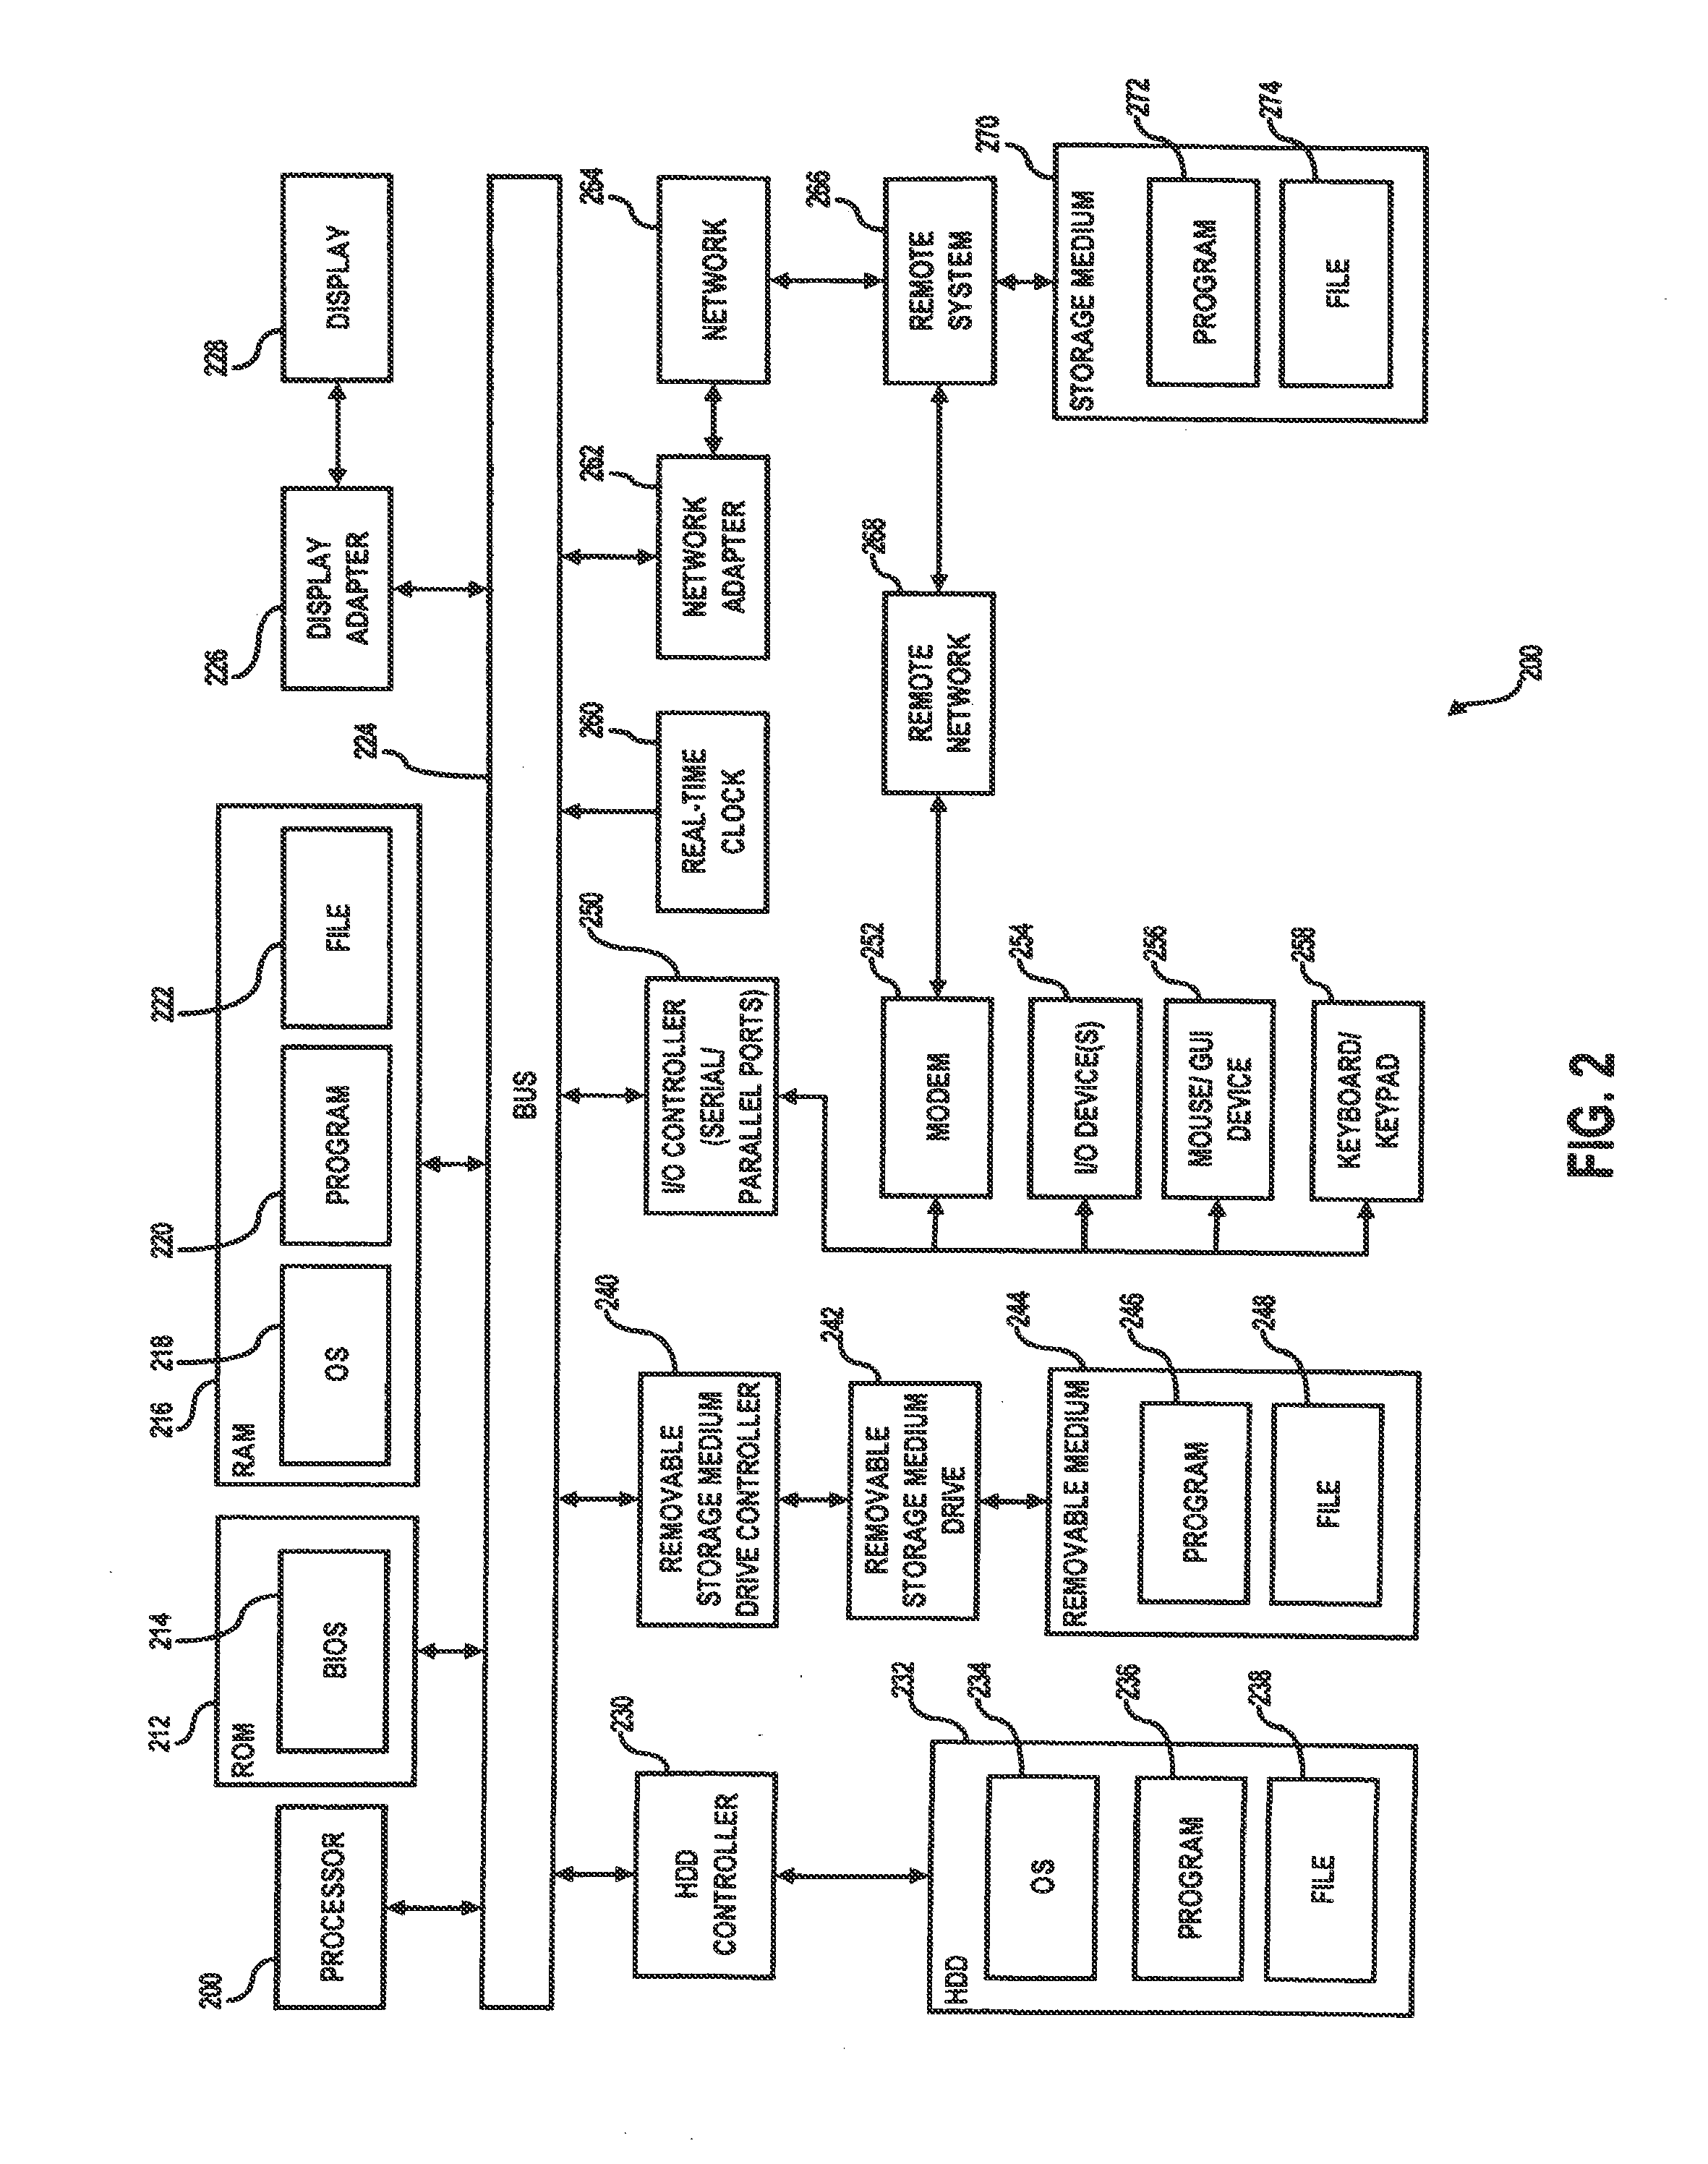 Method and apparatus for processing text and character data